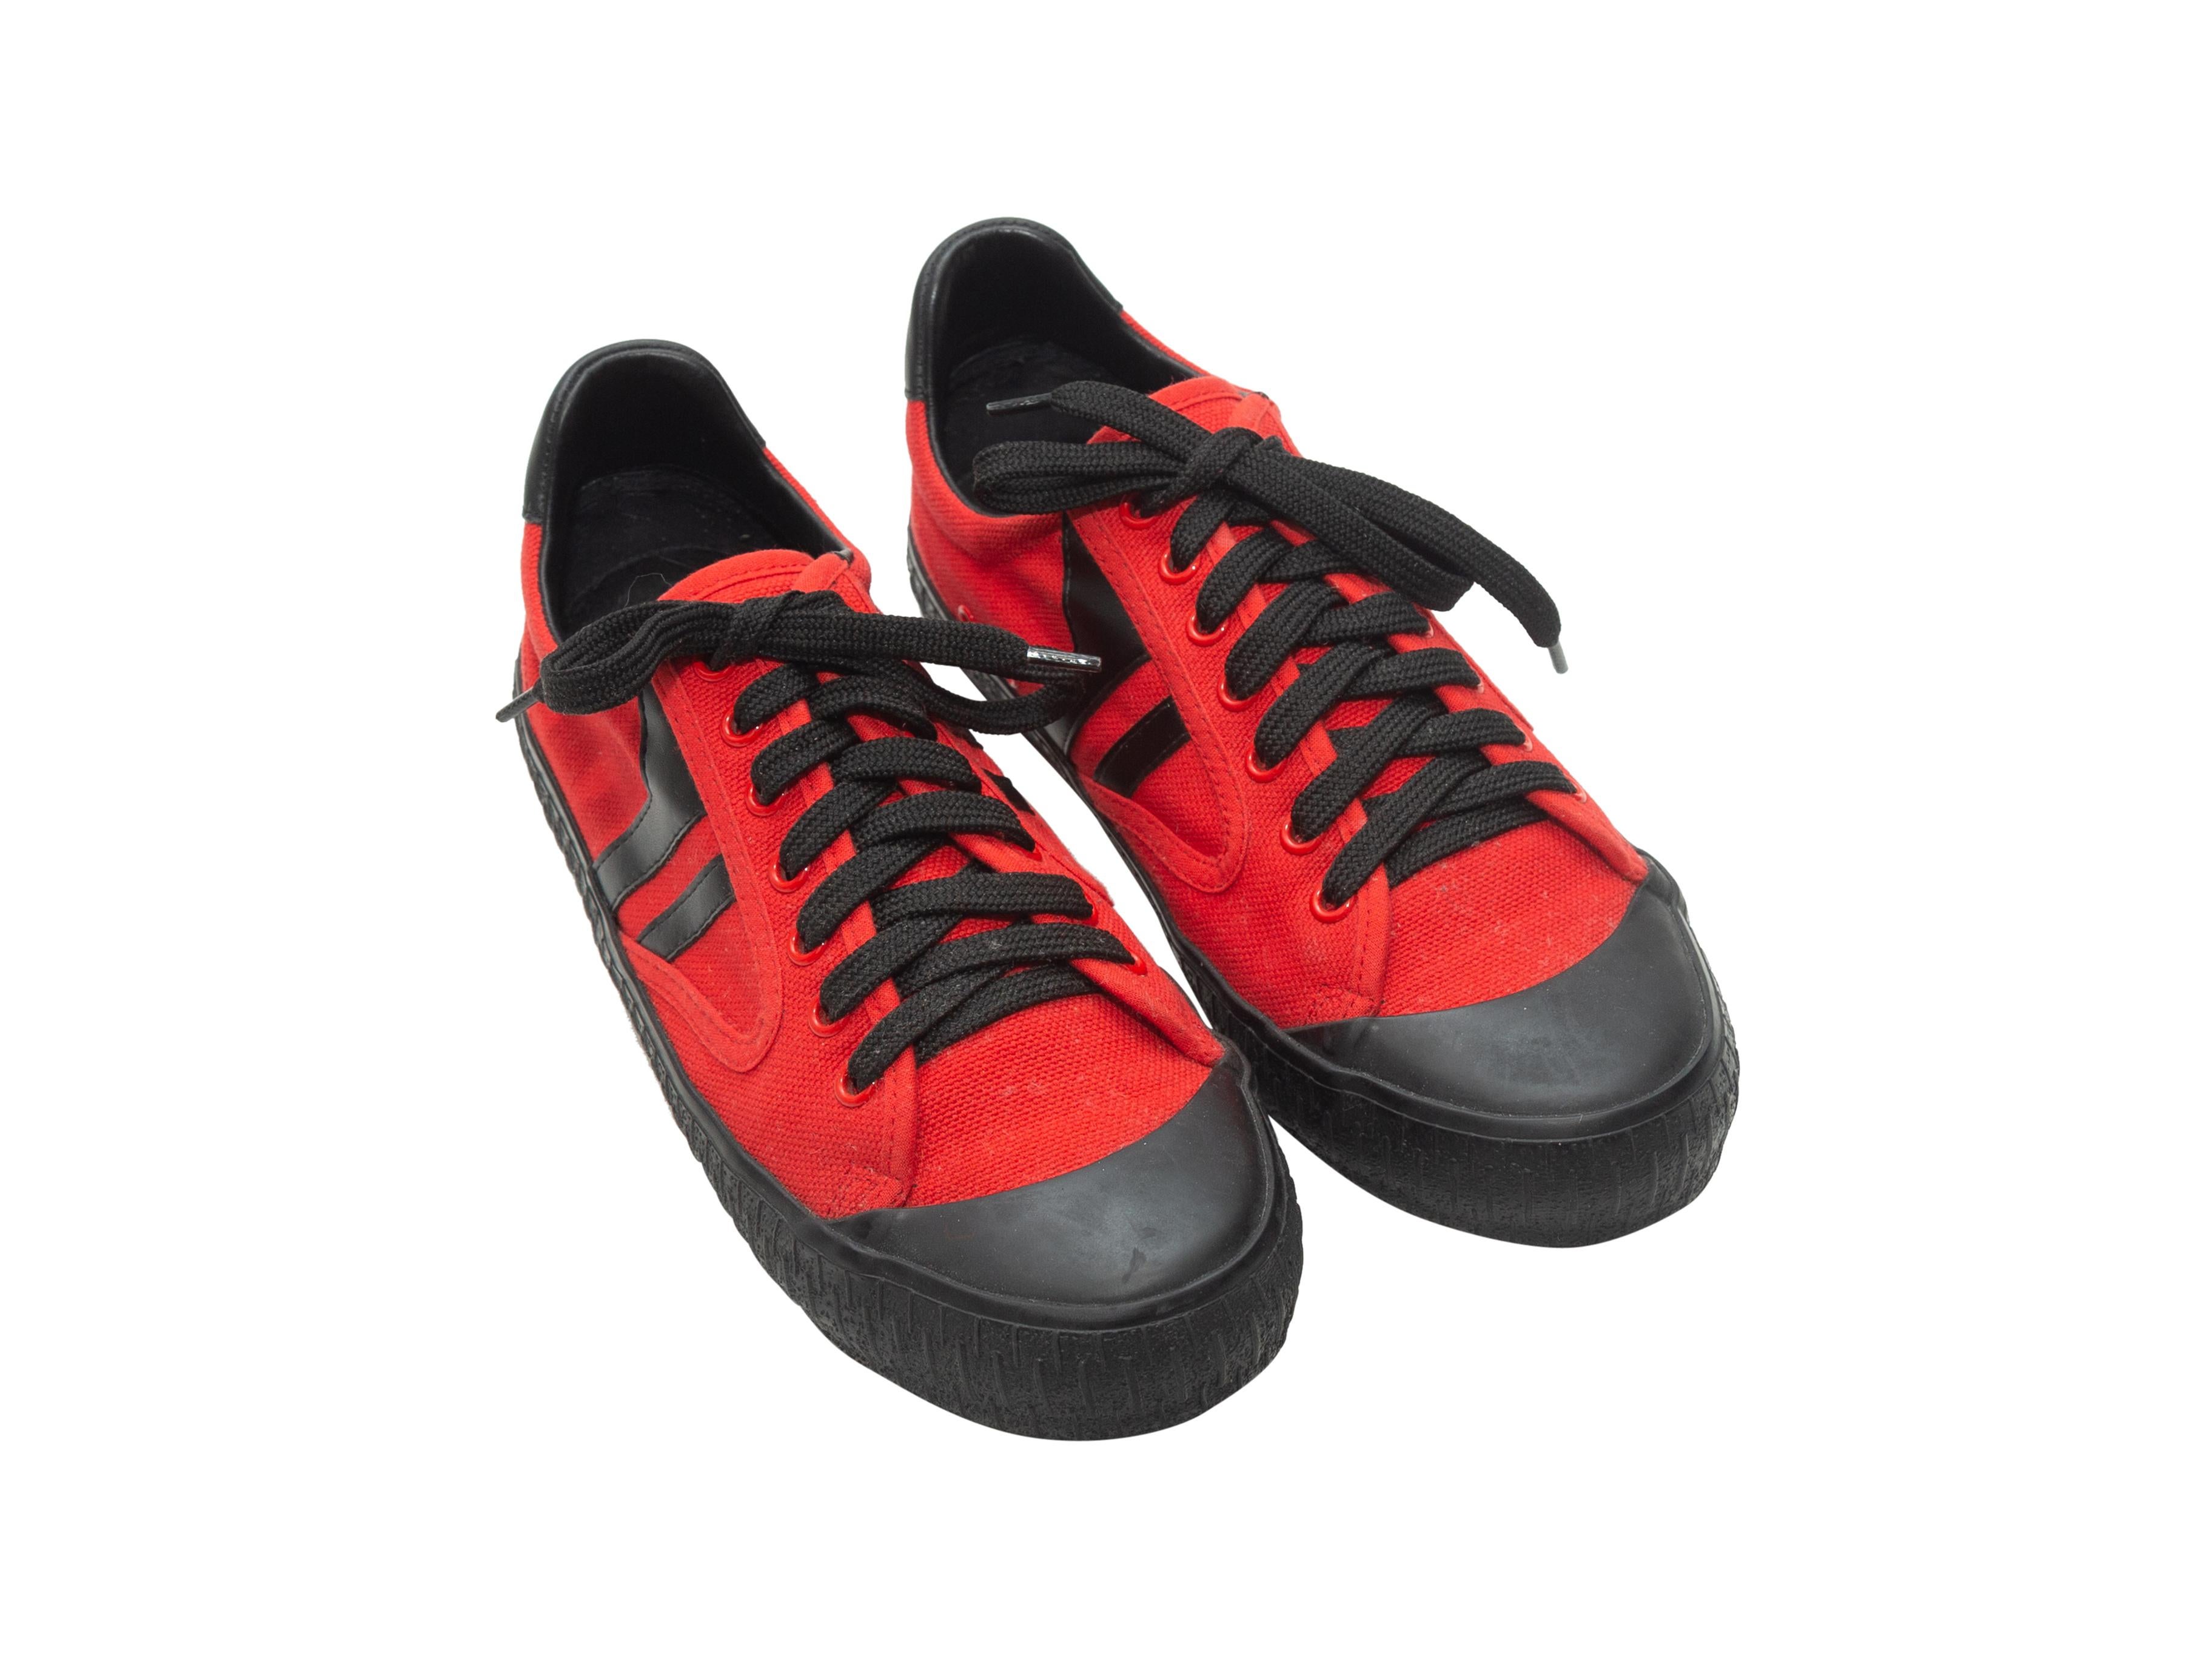 Product details: Red and black canvas Plimsole low-top sneakers by Celine. Rubber cap-toes. Lace-up tie closures at tops. Designer size 38. 1